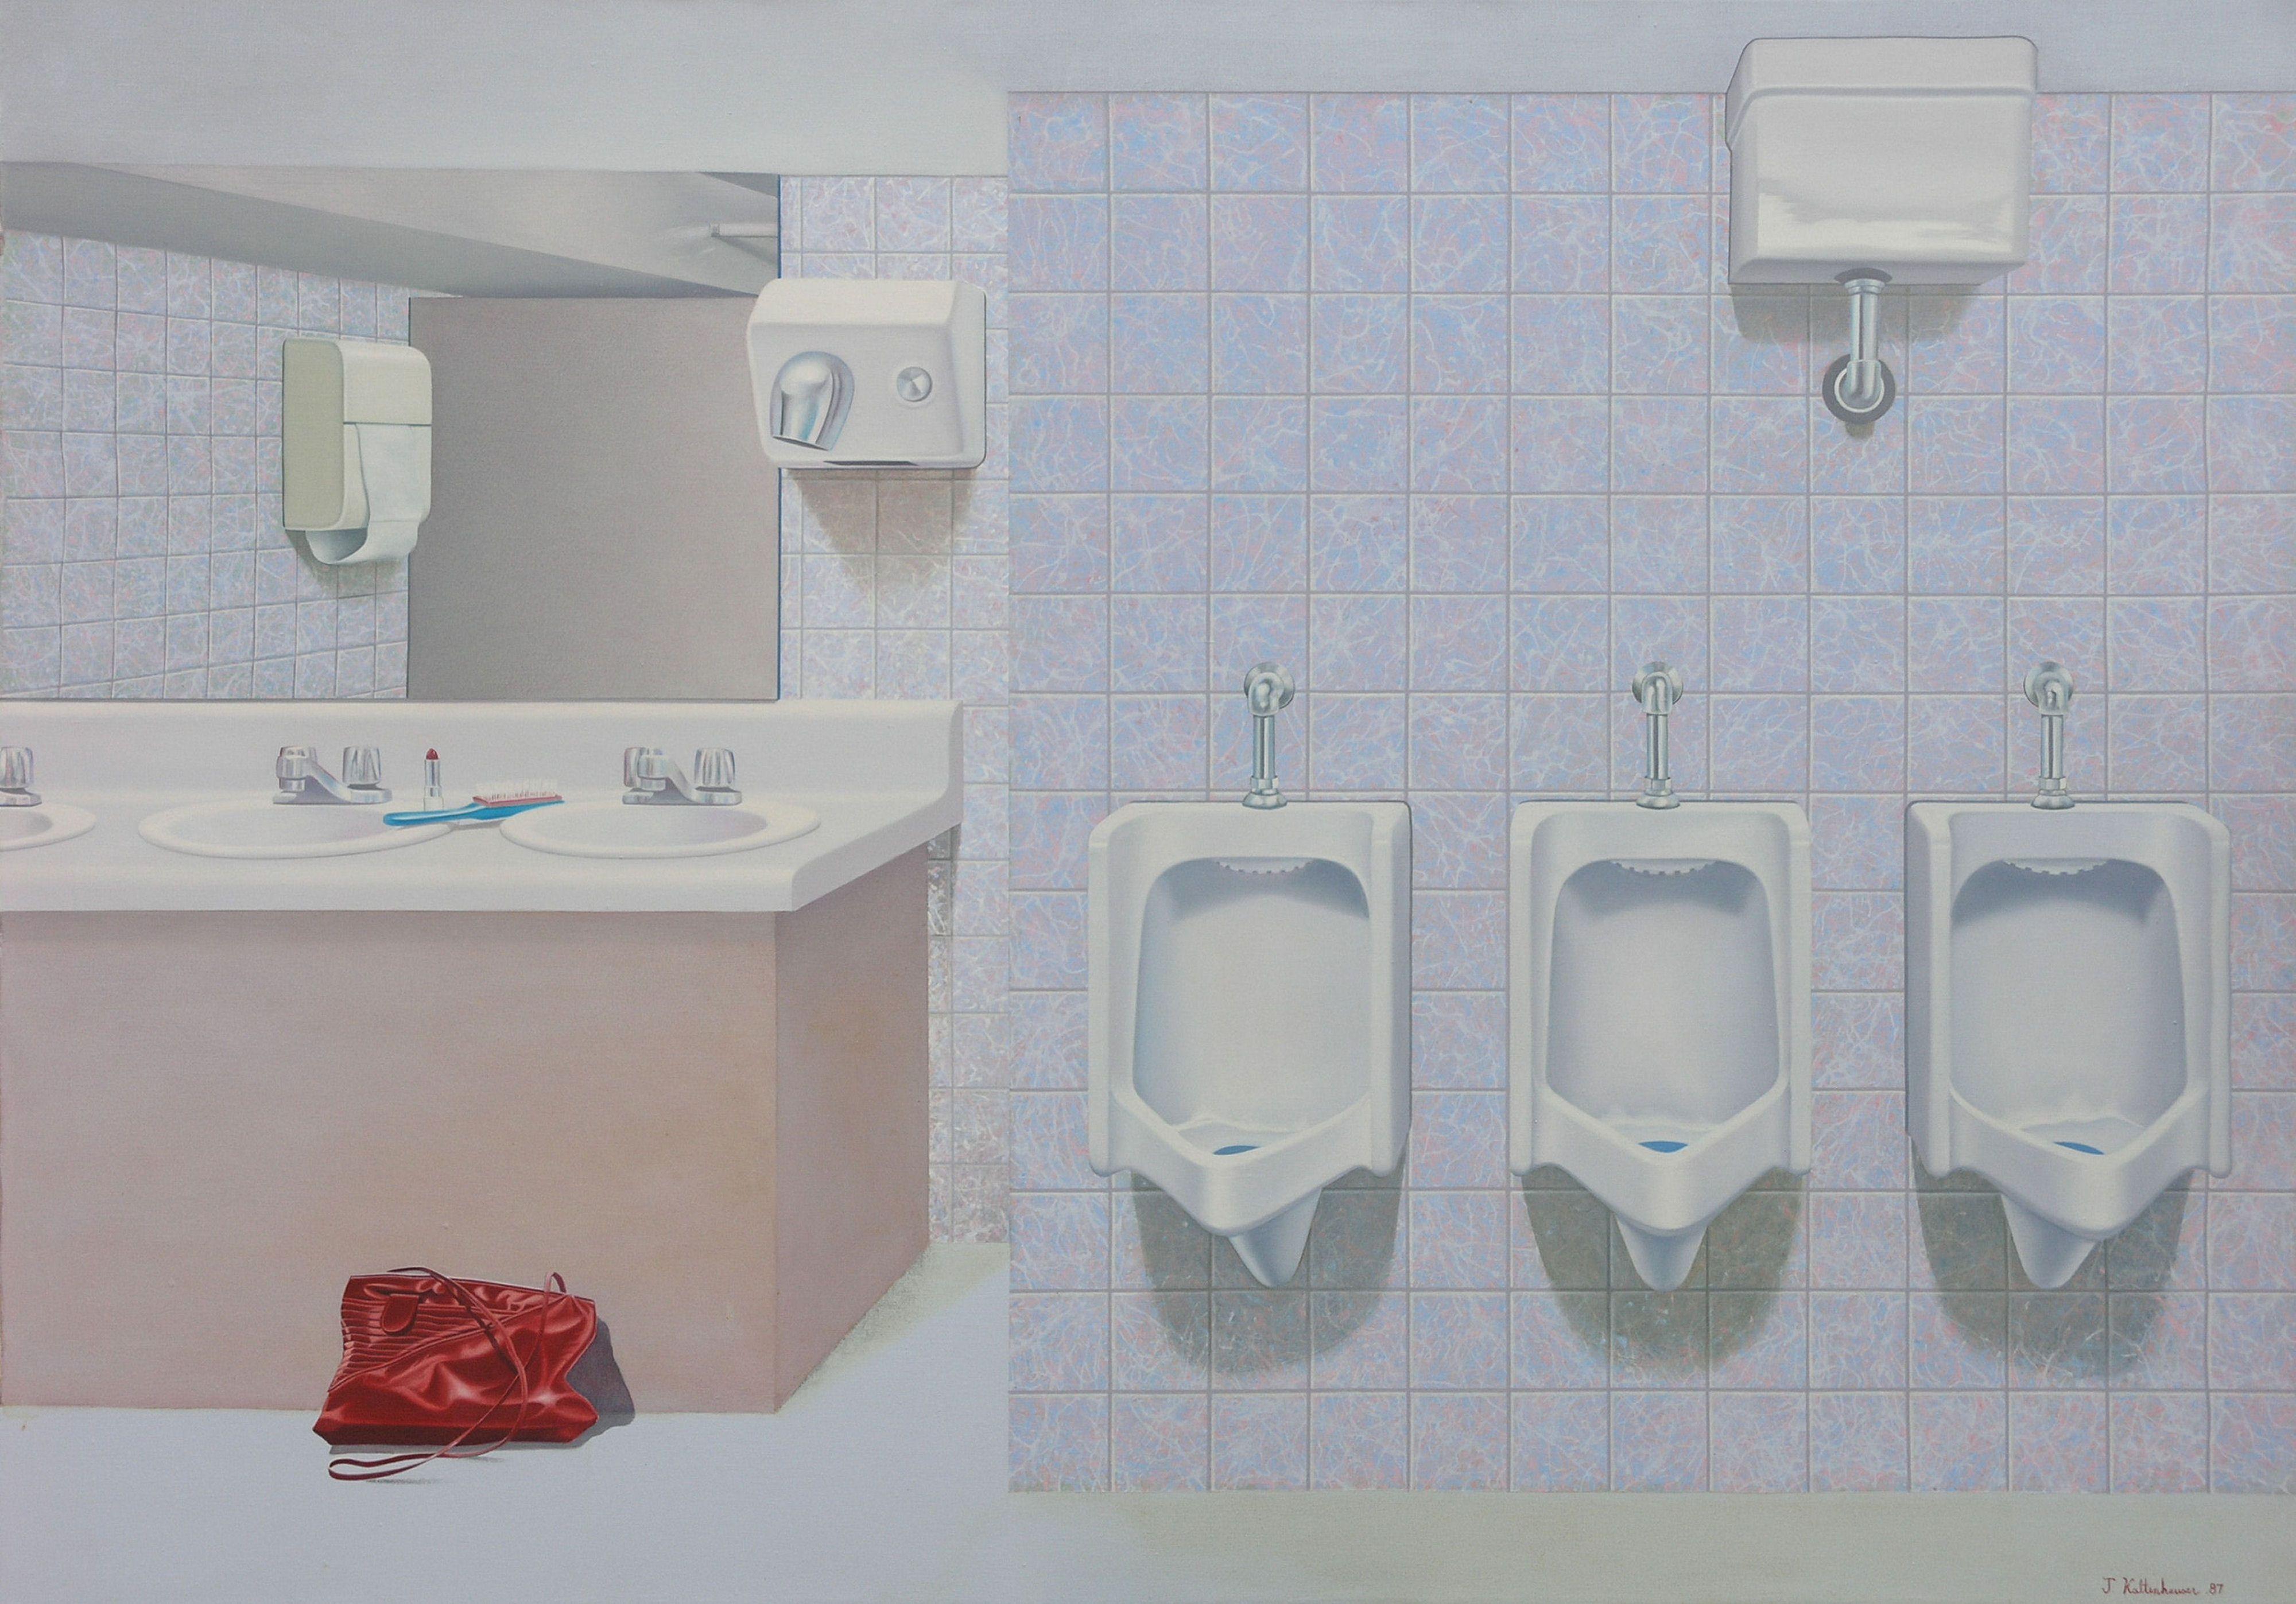 Years ago before I transitioned to mostly landscapes, I created paintings with a variety of subject matter including pop art, surrealism, and urban and rural culture. Powder Room was painted back in '87 and I believe it is more relevant today than